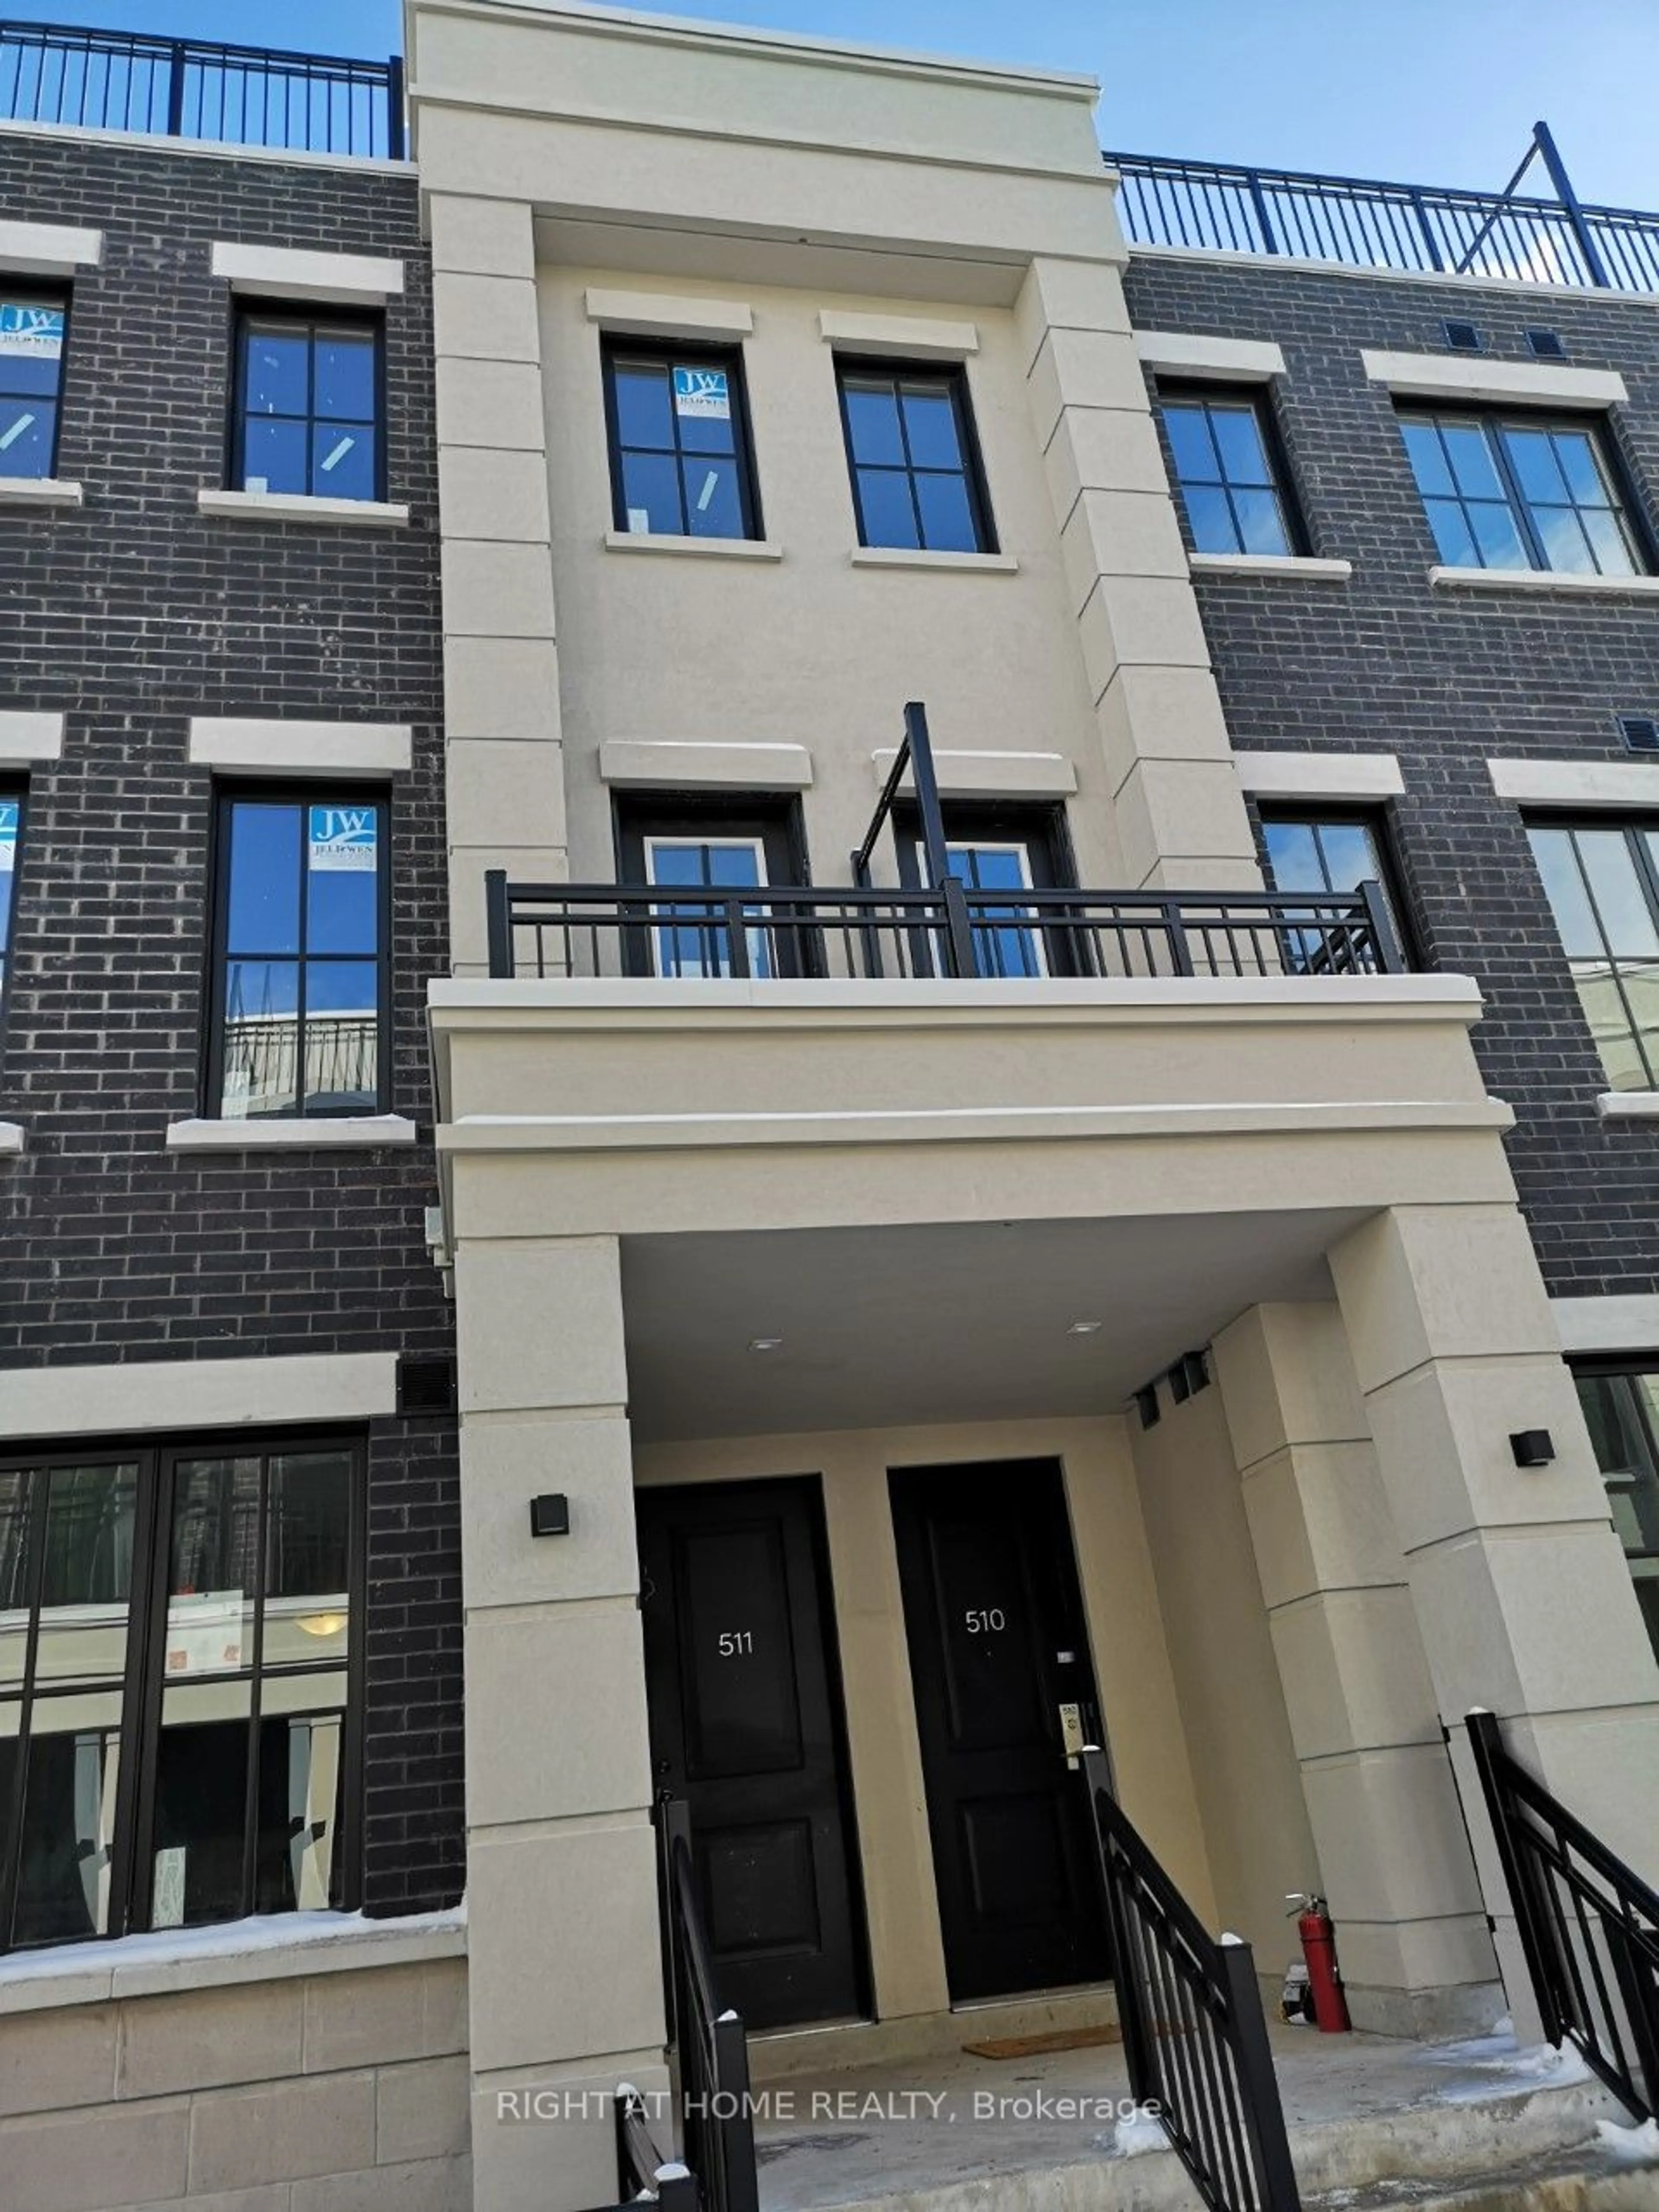 A pic from exterior of the house or condo for 657 Cricklewood Dr #510, Mississauga Ontario L5E 0B8